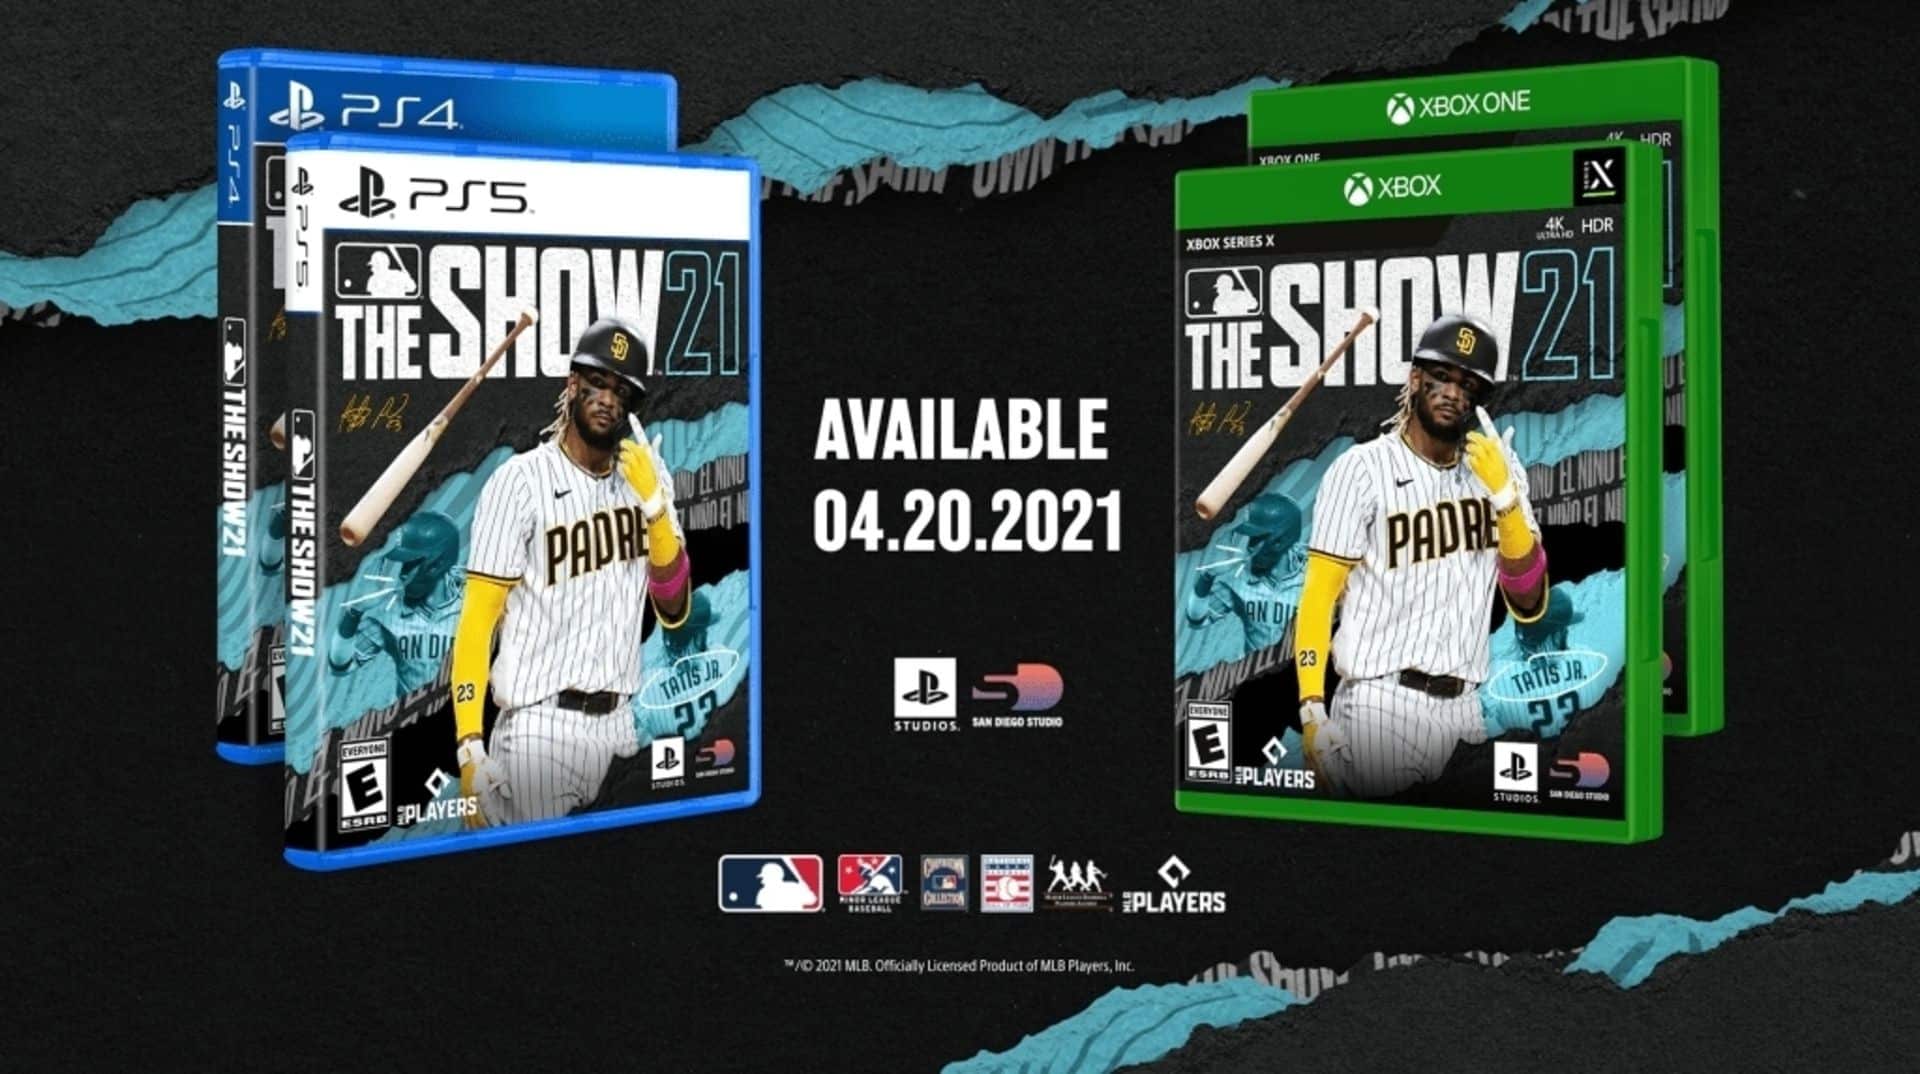 MLB: The Show 21 game editions